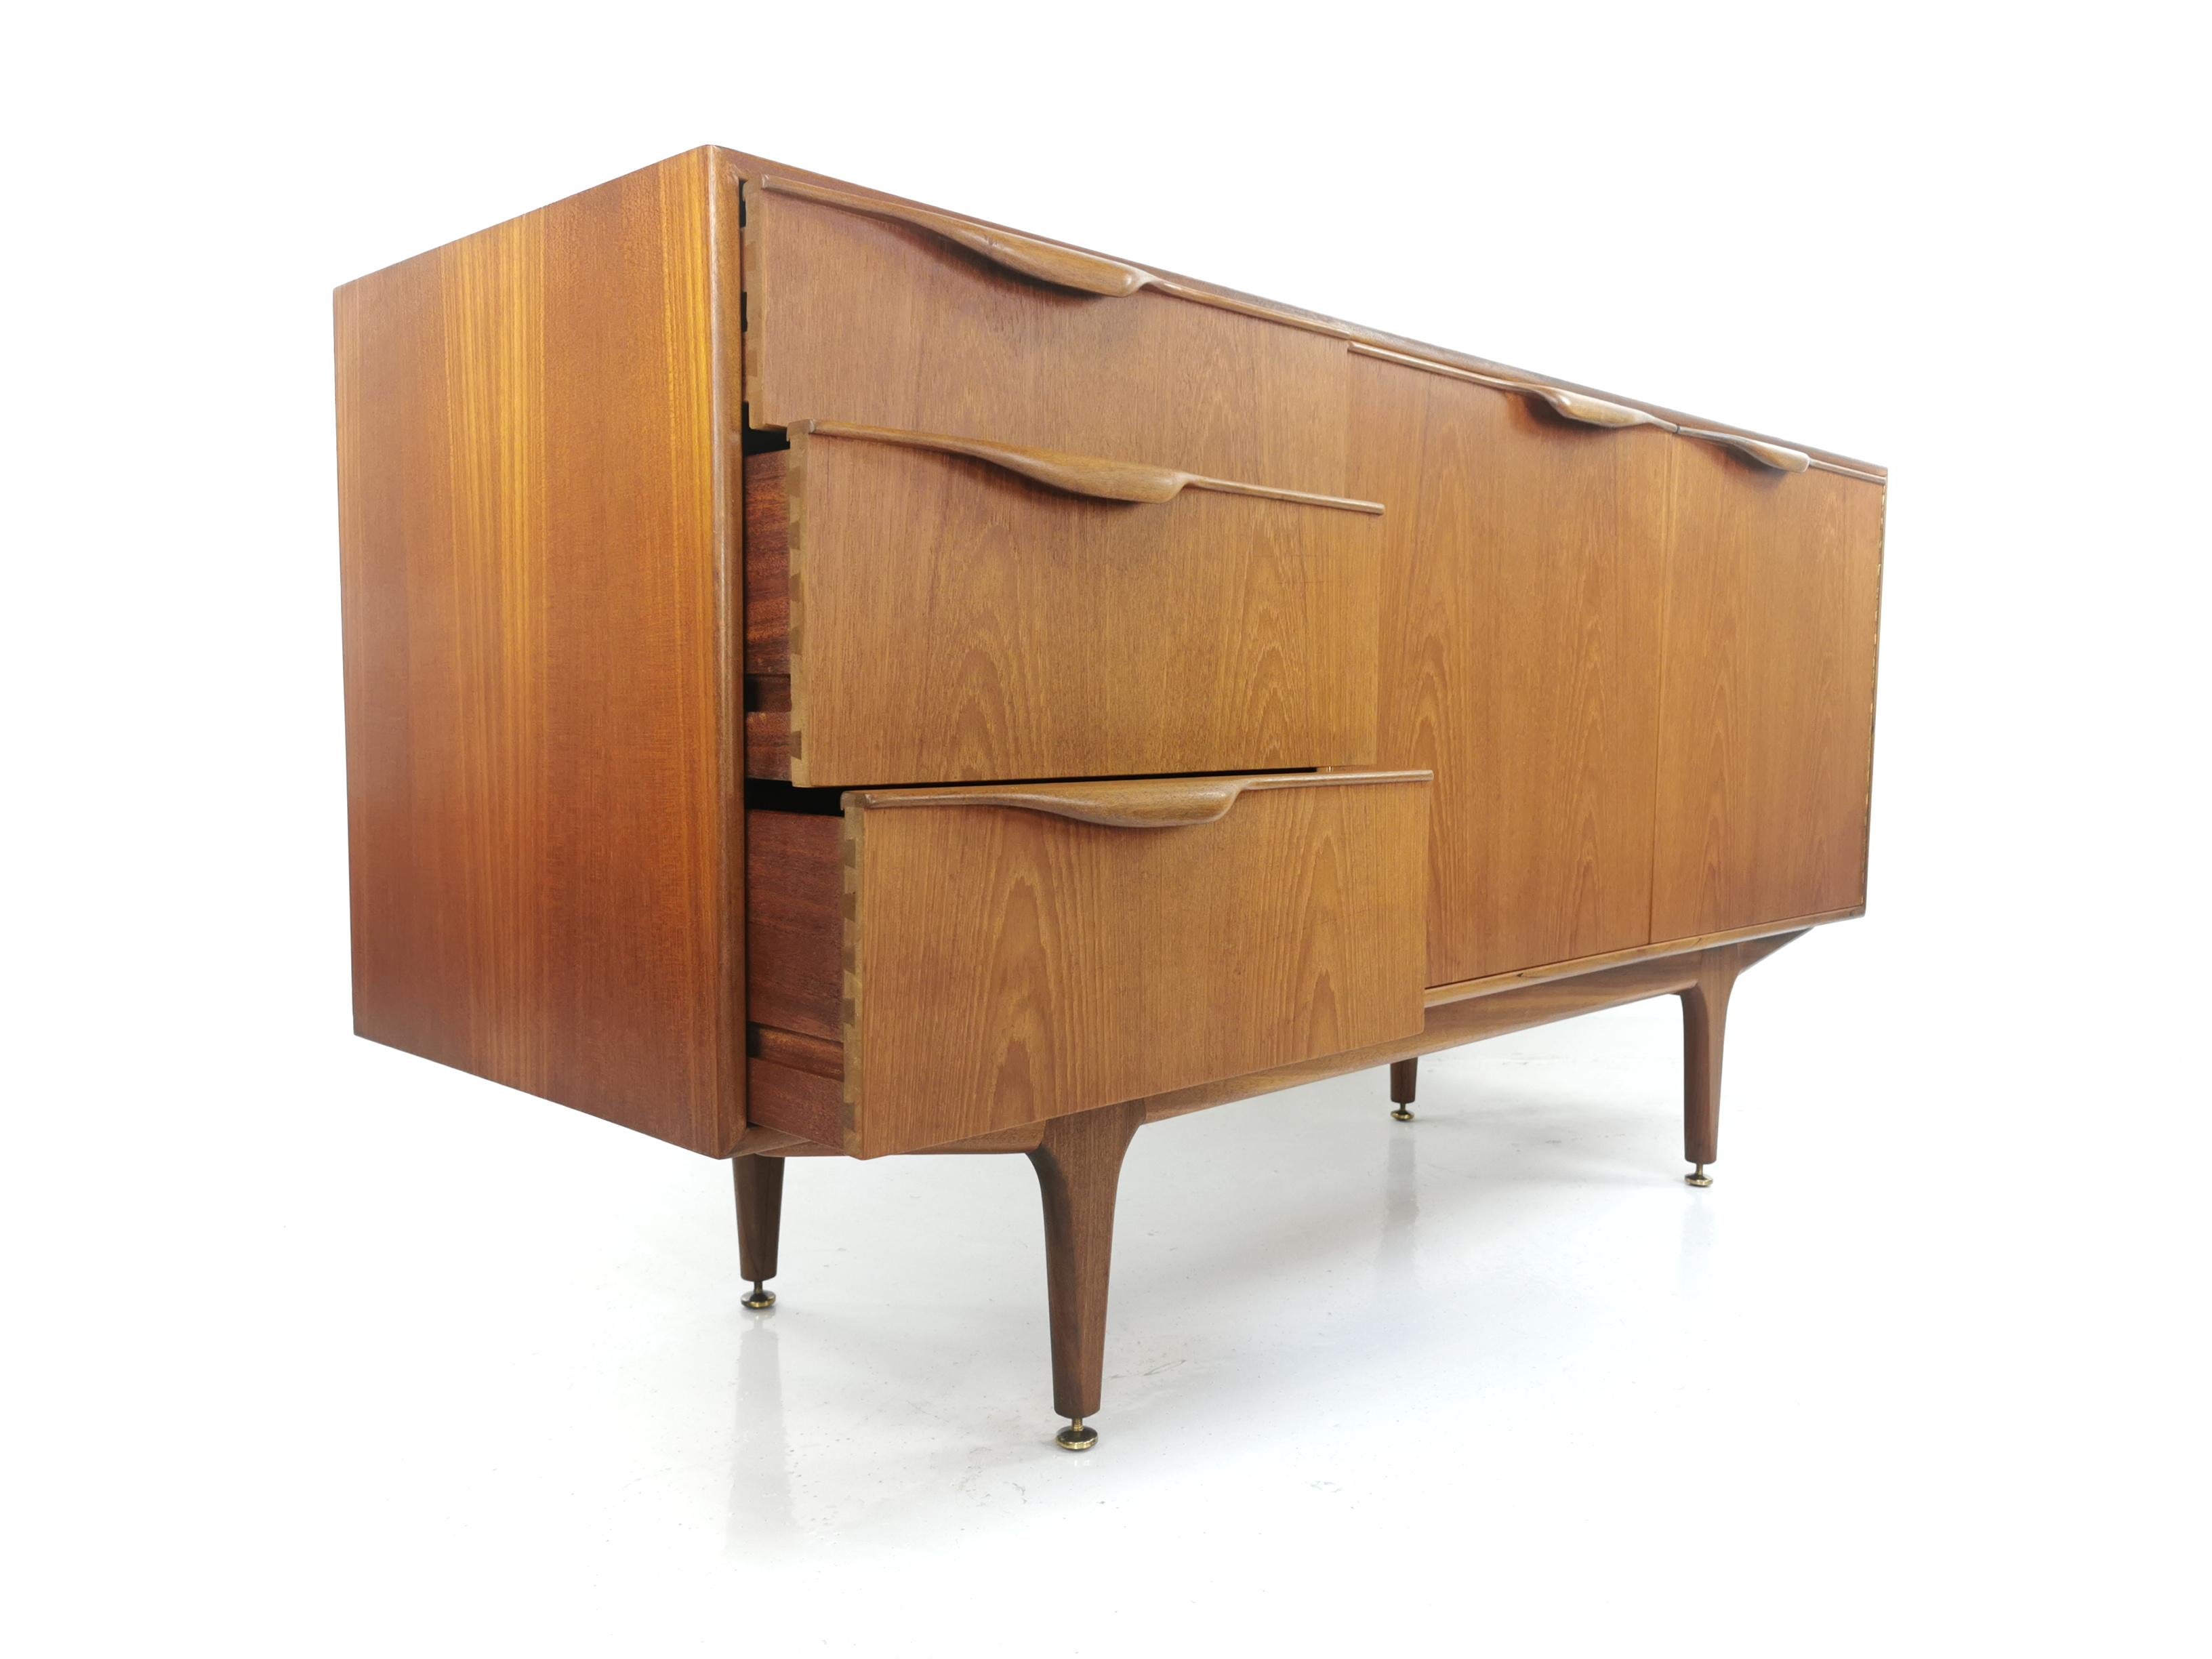 Mcintosh teak sideboard.

AH Mcintosh compact teak sideboard with fin handles. Designed by Tom Robertson, circa 1960s. 

The sideboard has three drawers one of which is lined with the original felt and a large cupboard space.

From the Dunvegan